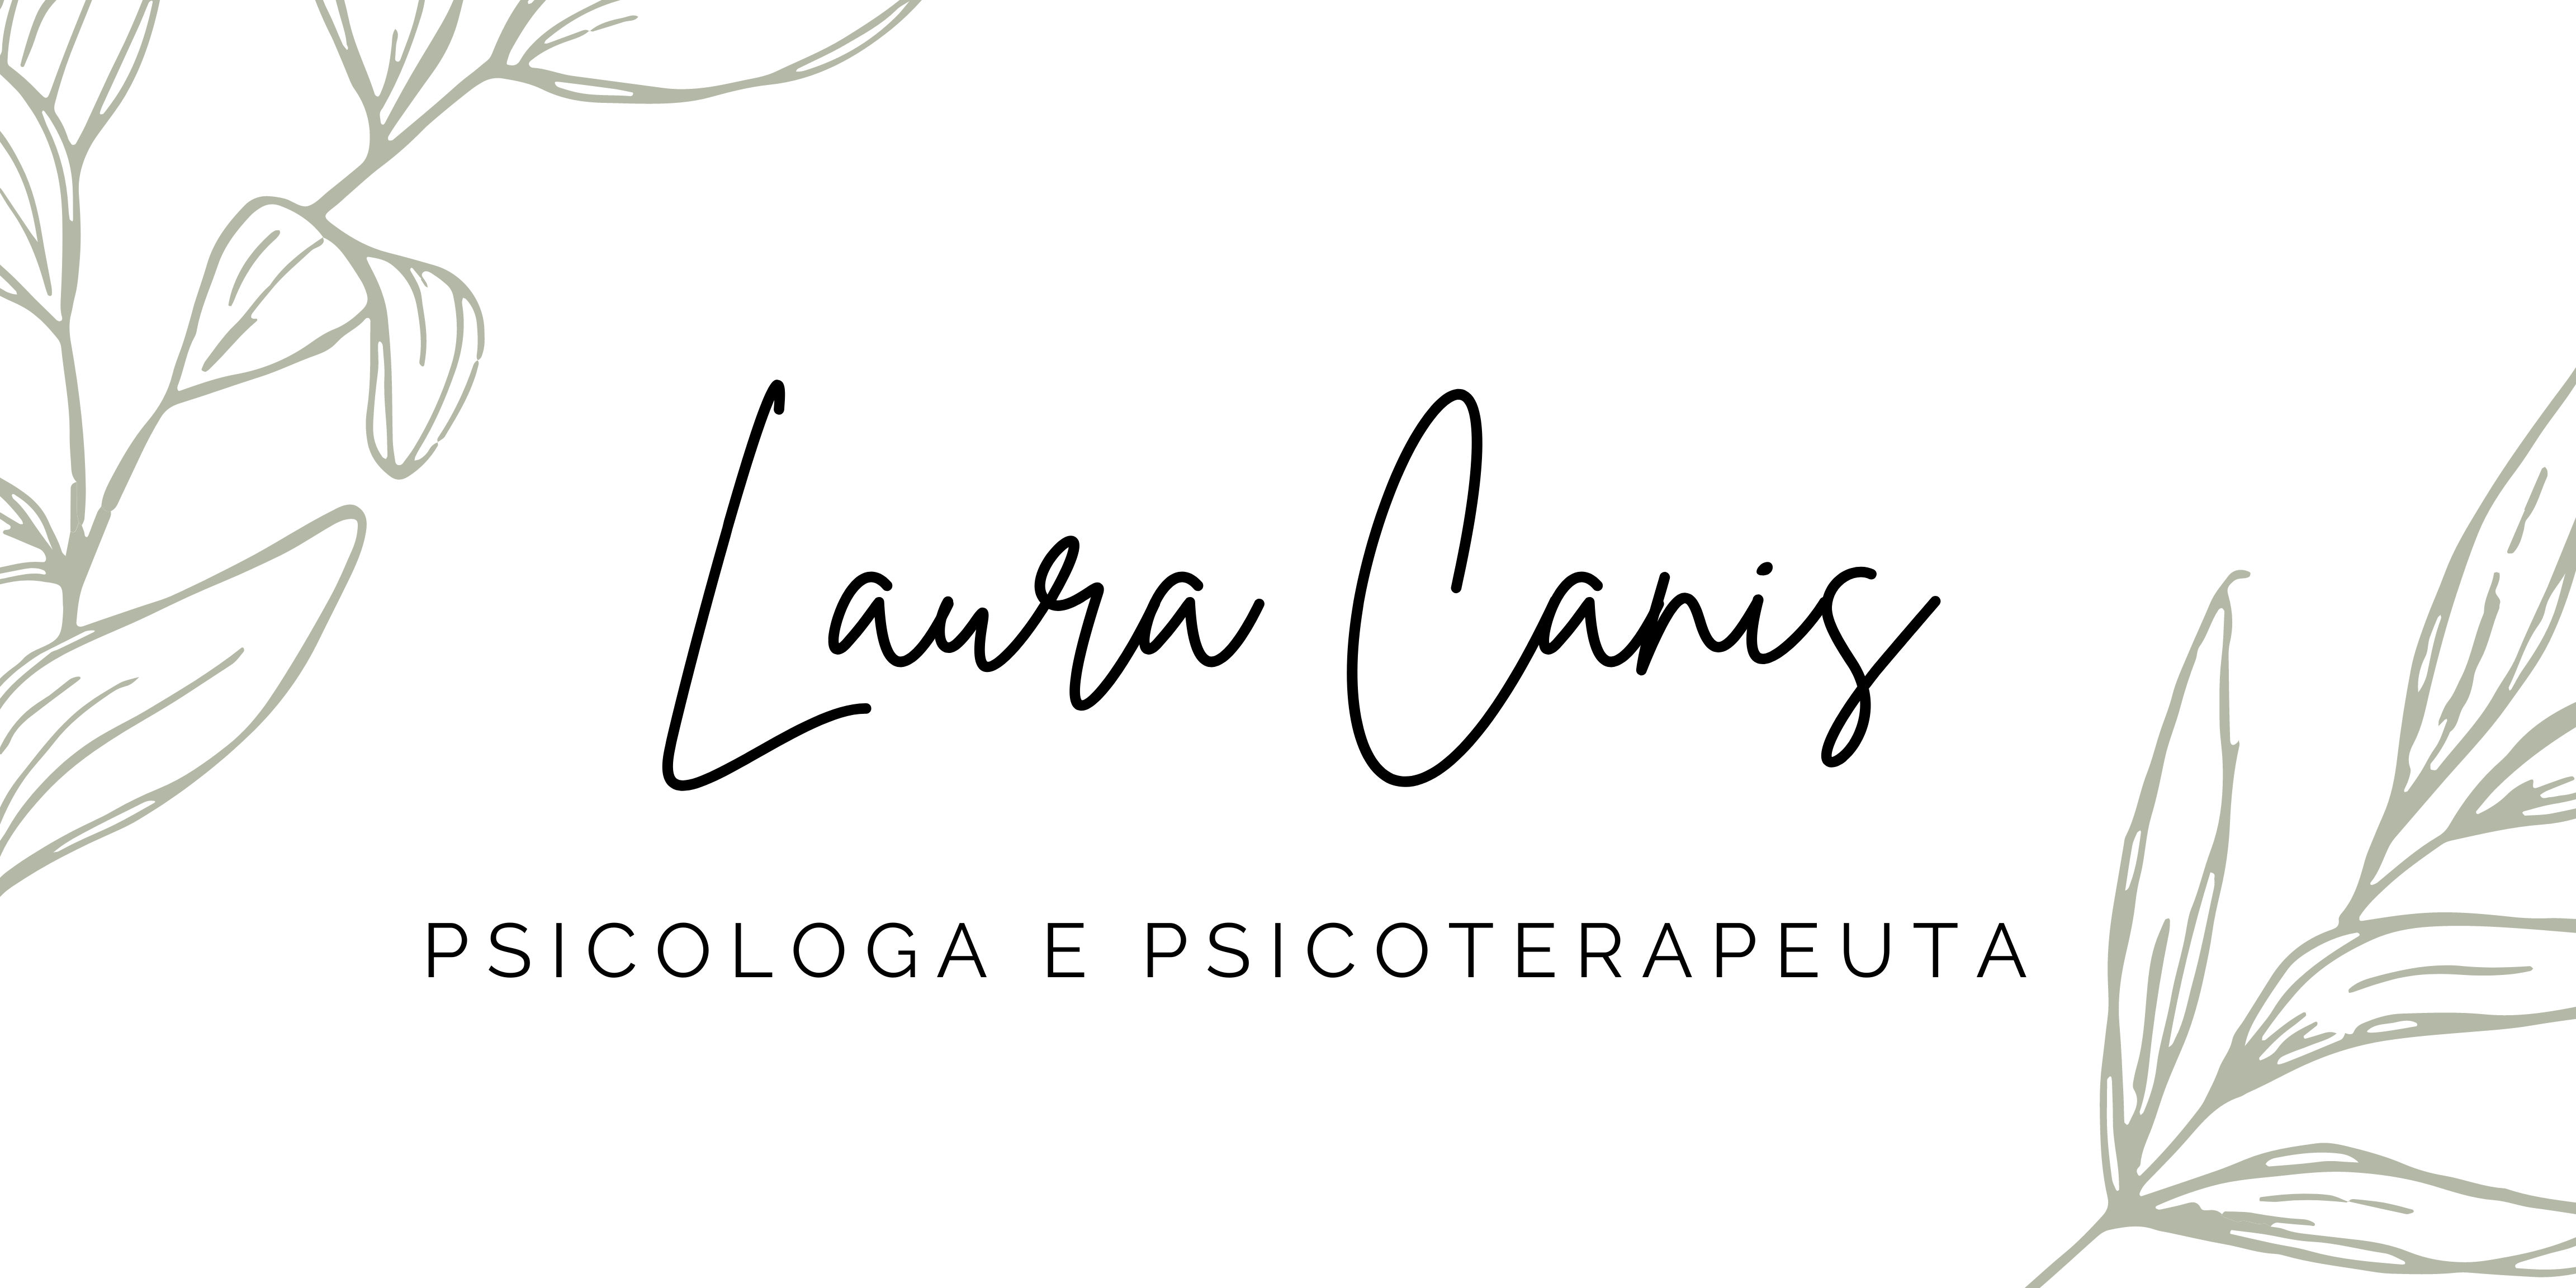 Laura Canis